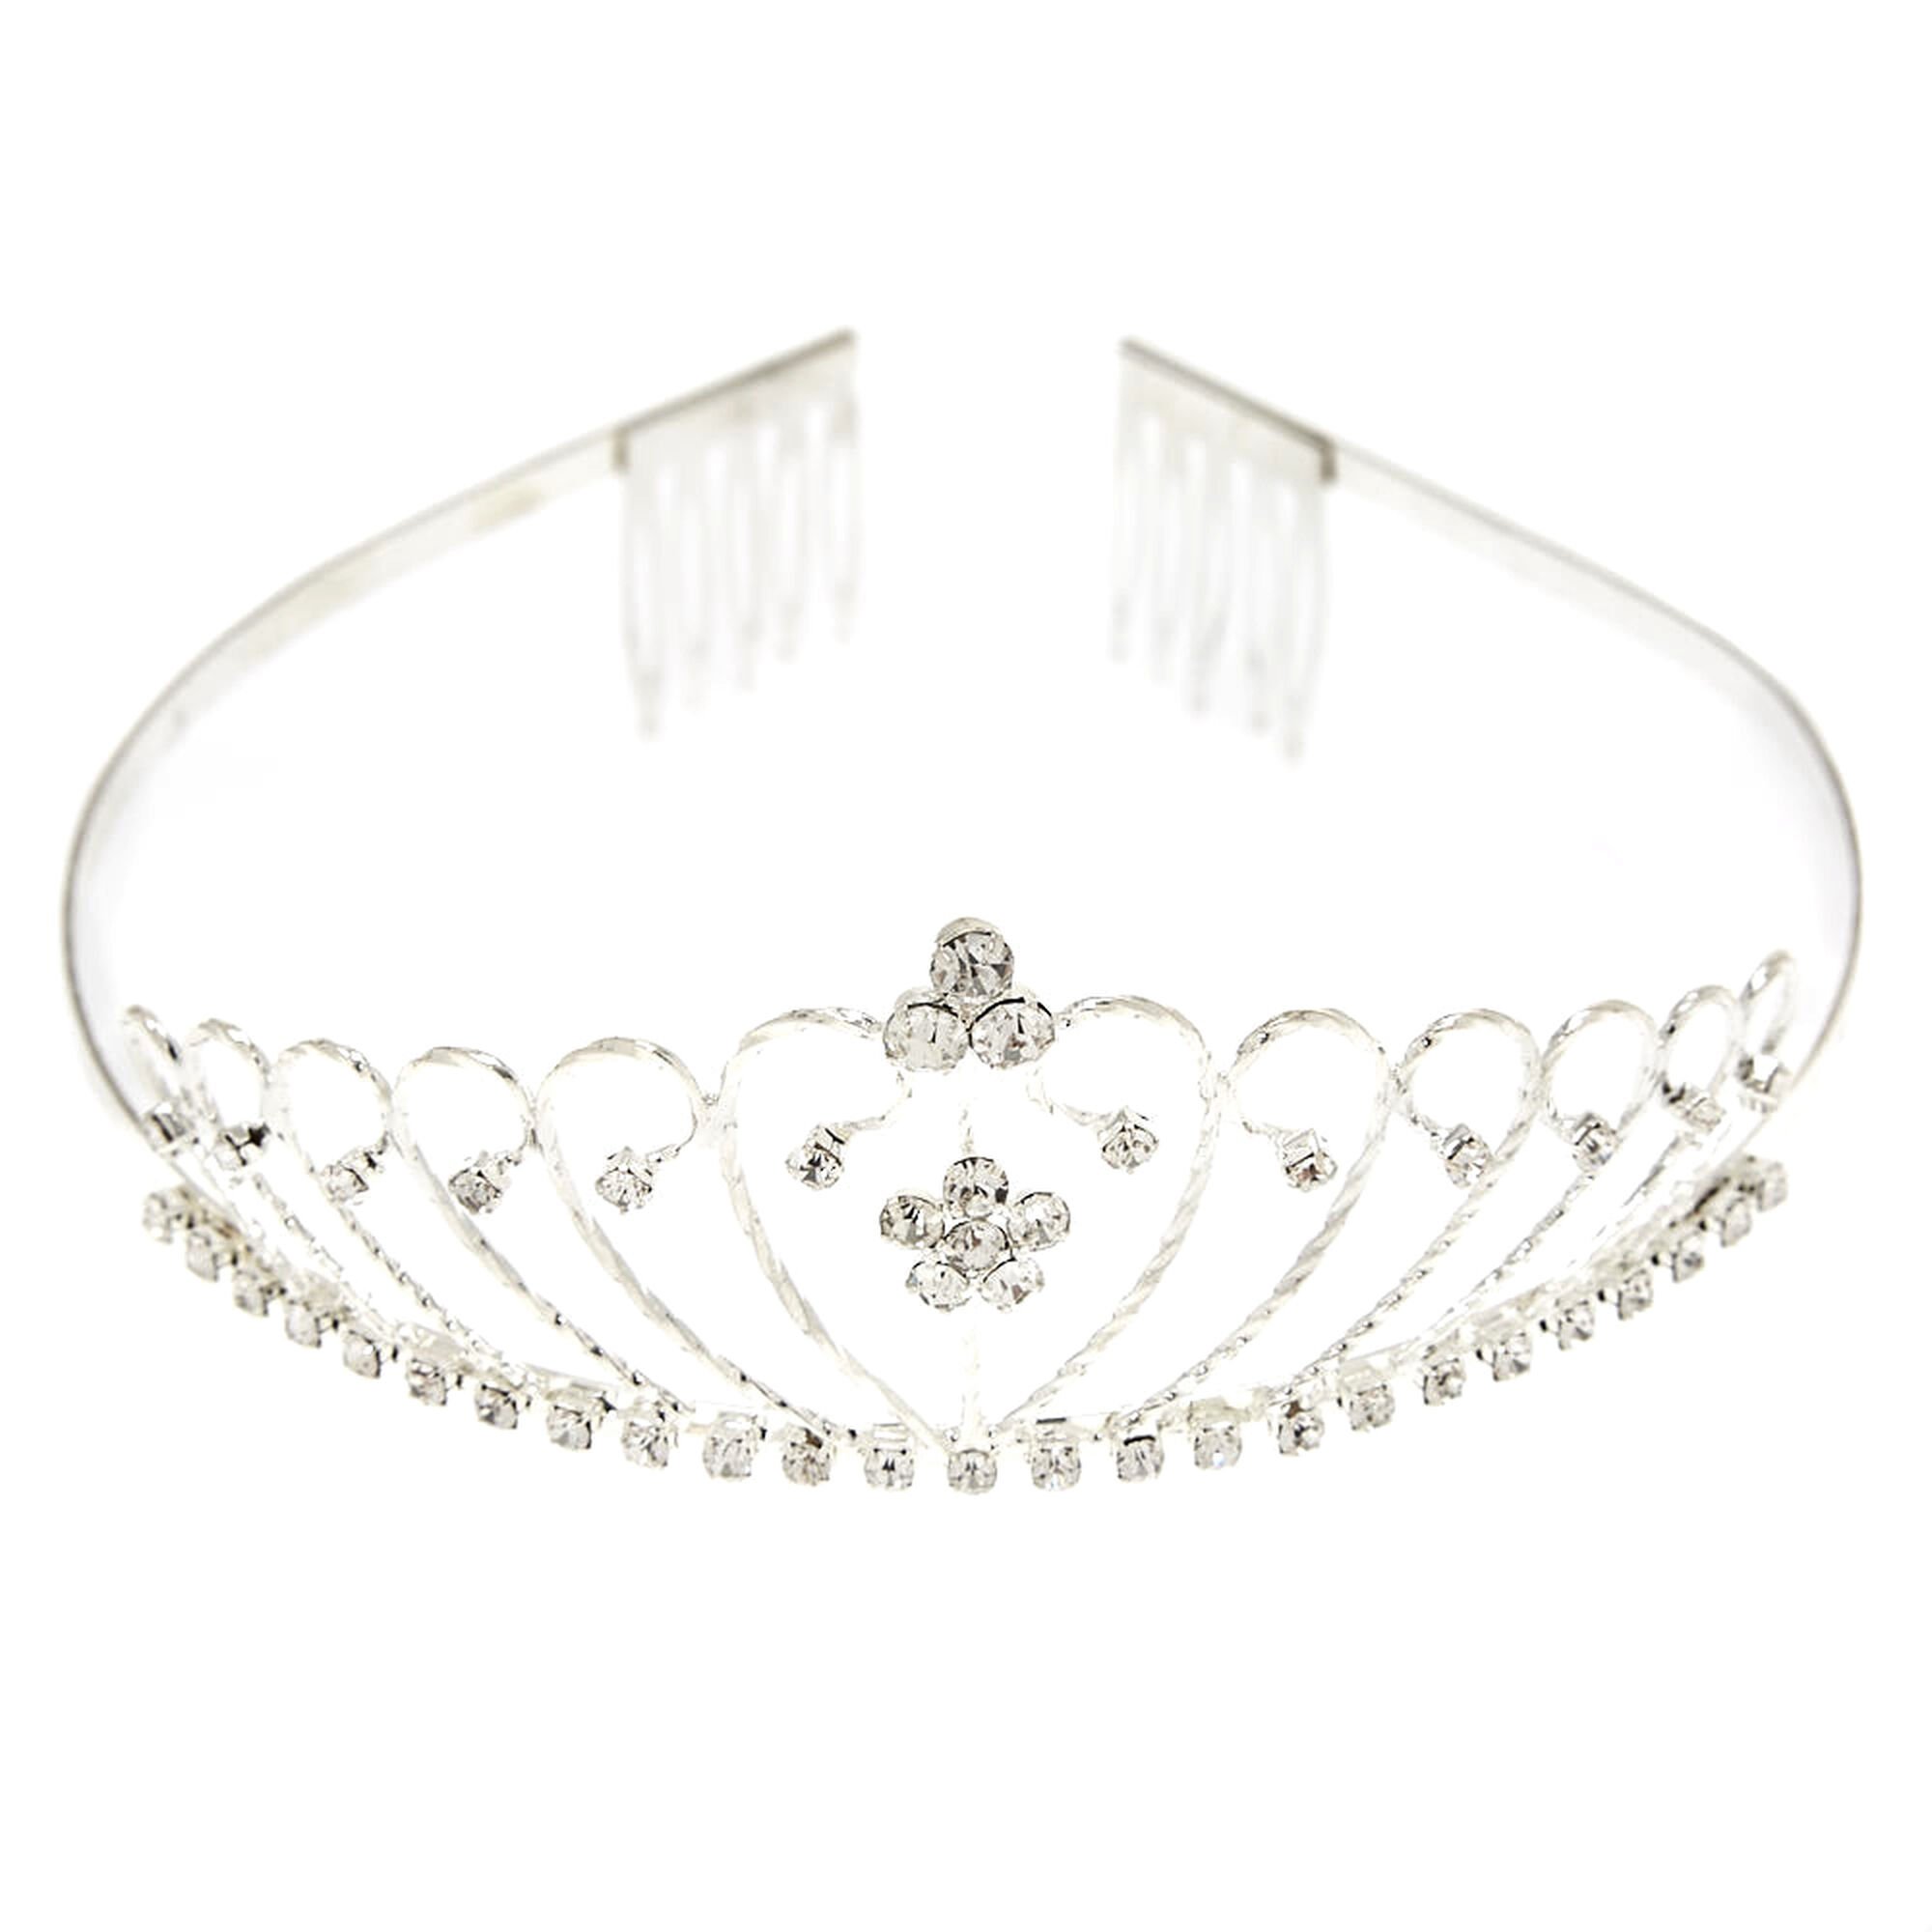 View Claires Tone Crystal Daisy Tiara Silver information